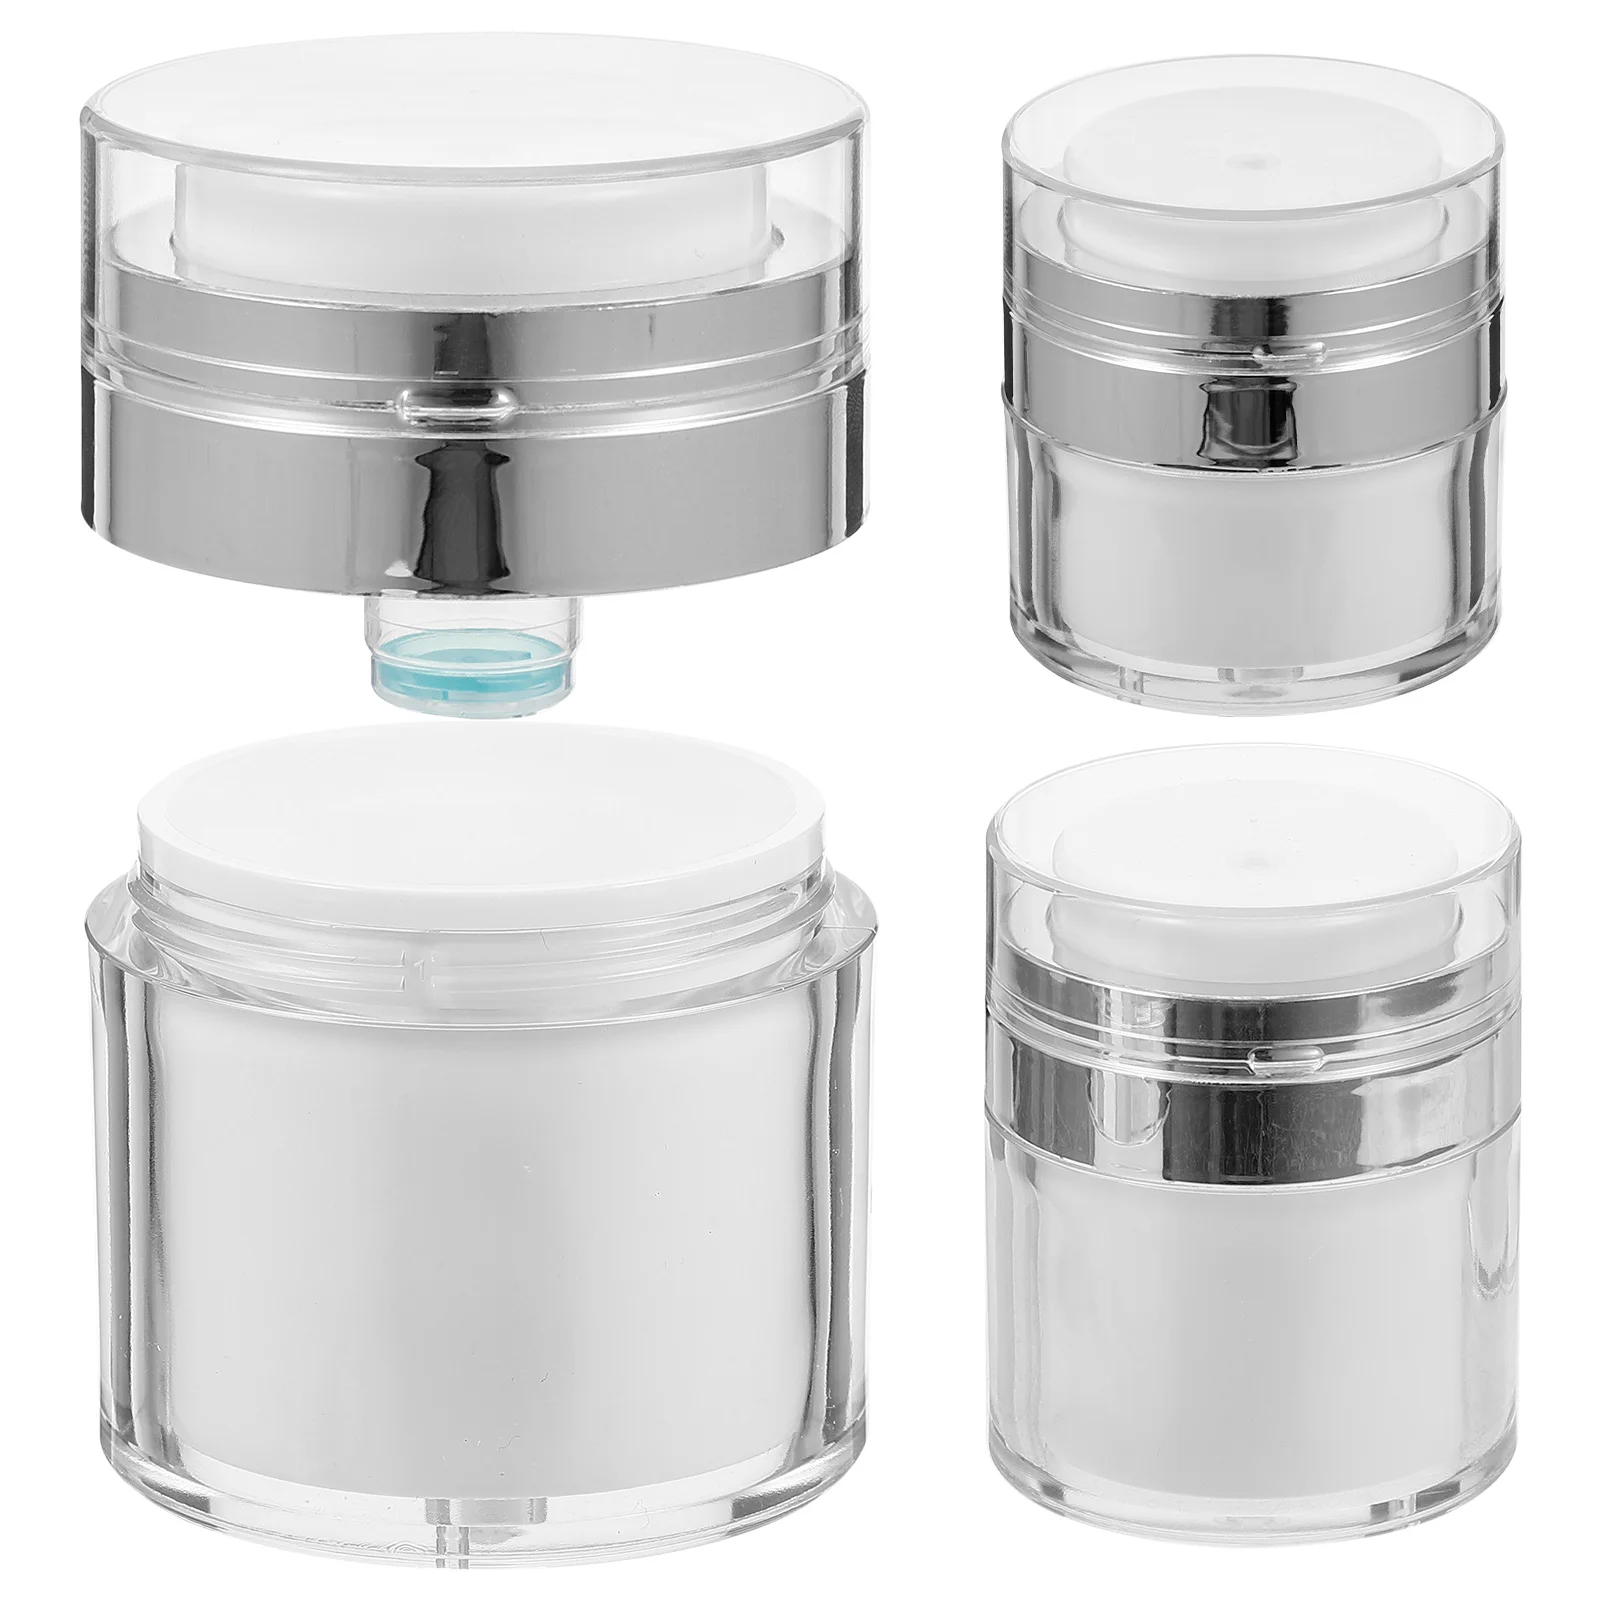 3 Pcs Press Cream Jar Dispensers Lotion Cosmetics Sub Packing Bottles Empty Container Pump Travel Containers Liquid Practical